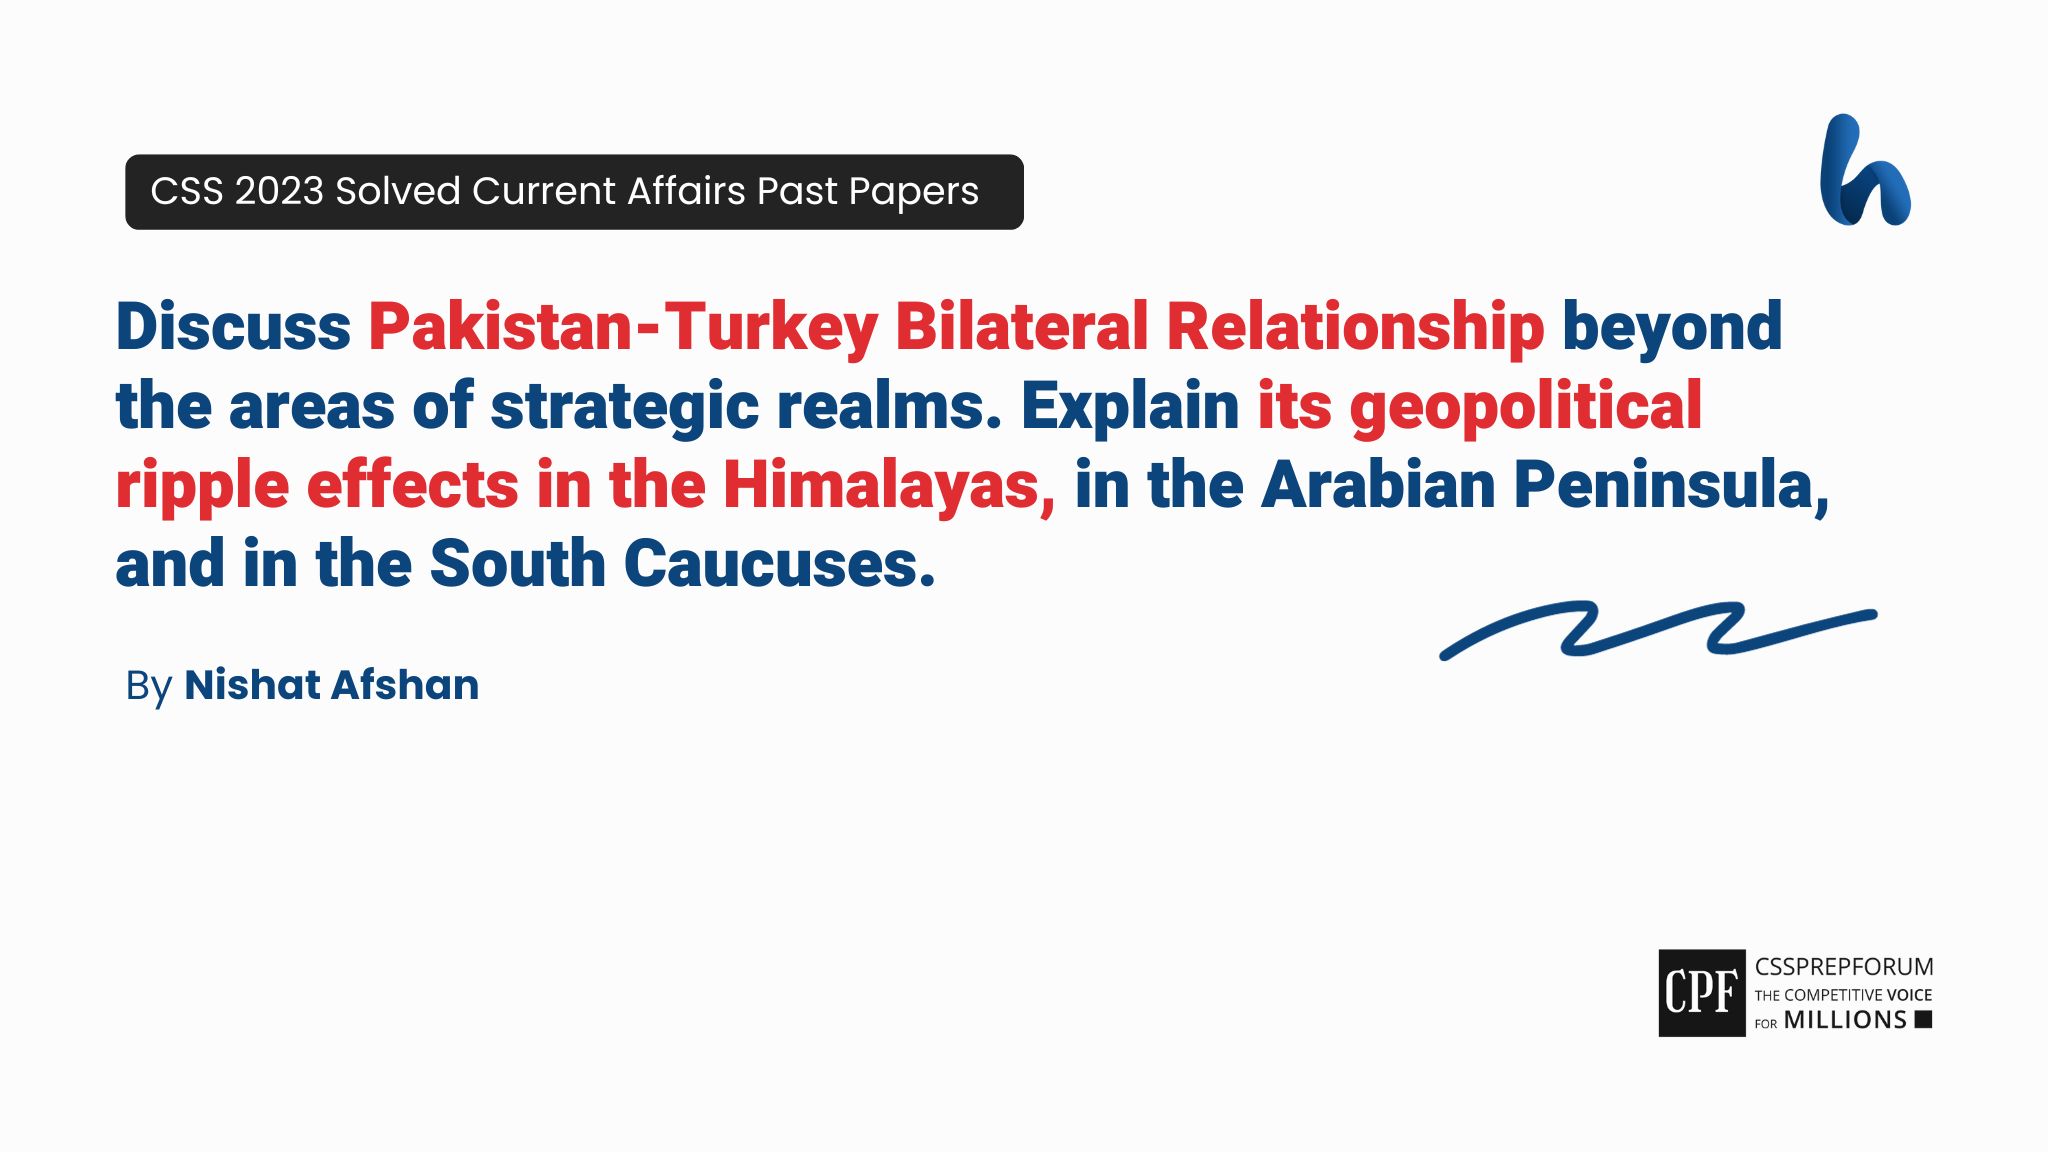 Discuss Pakistan-Turkey Bilateral Relationship beyond the areas of strategic realms. Explain its geopolitical ripple effects in the Himalayas, in the Arabian Peninsula, and in the South Caucuses.